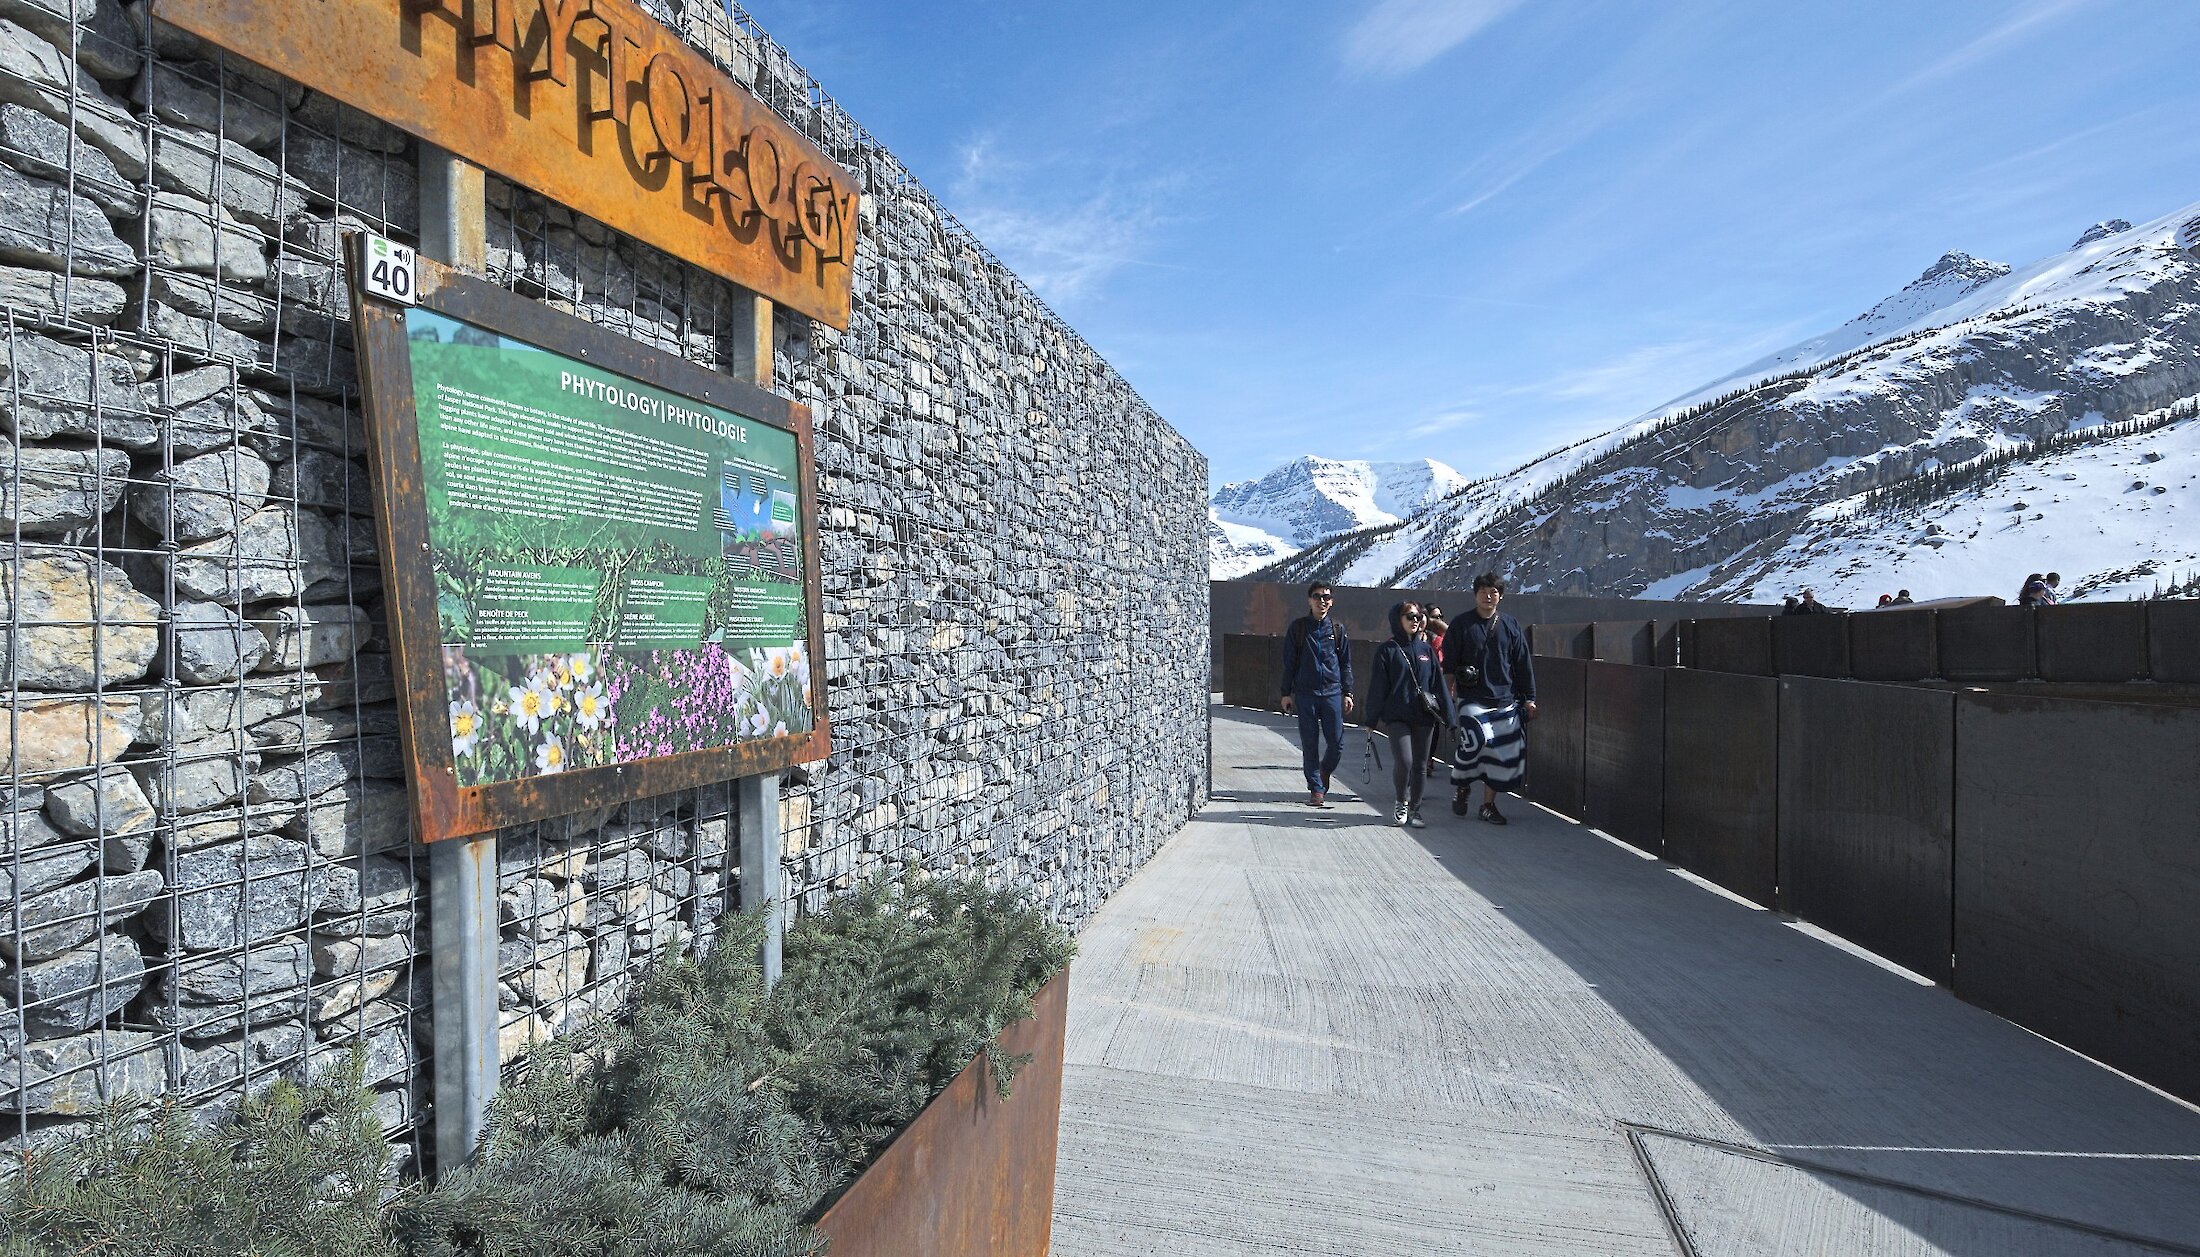 The entrance of the skybridge at the Columbia Icefield Adventure centre